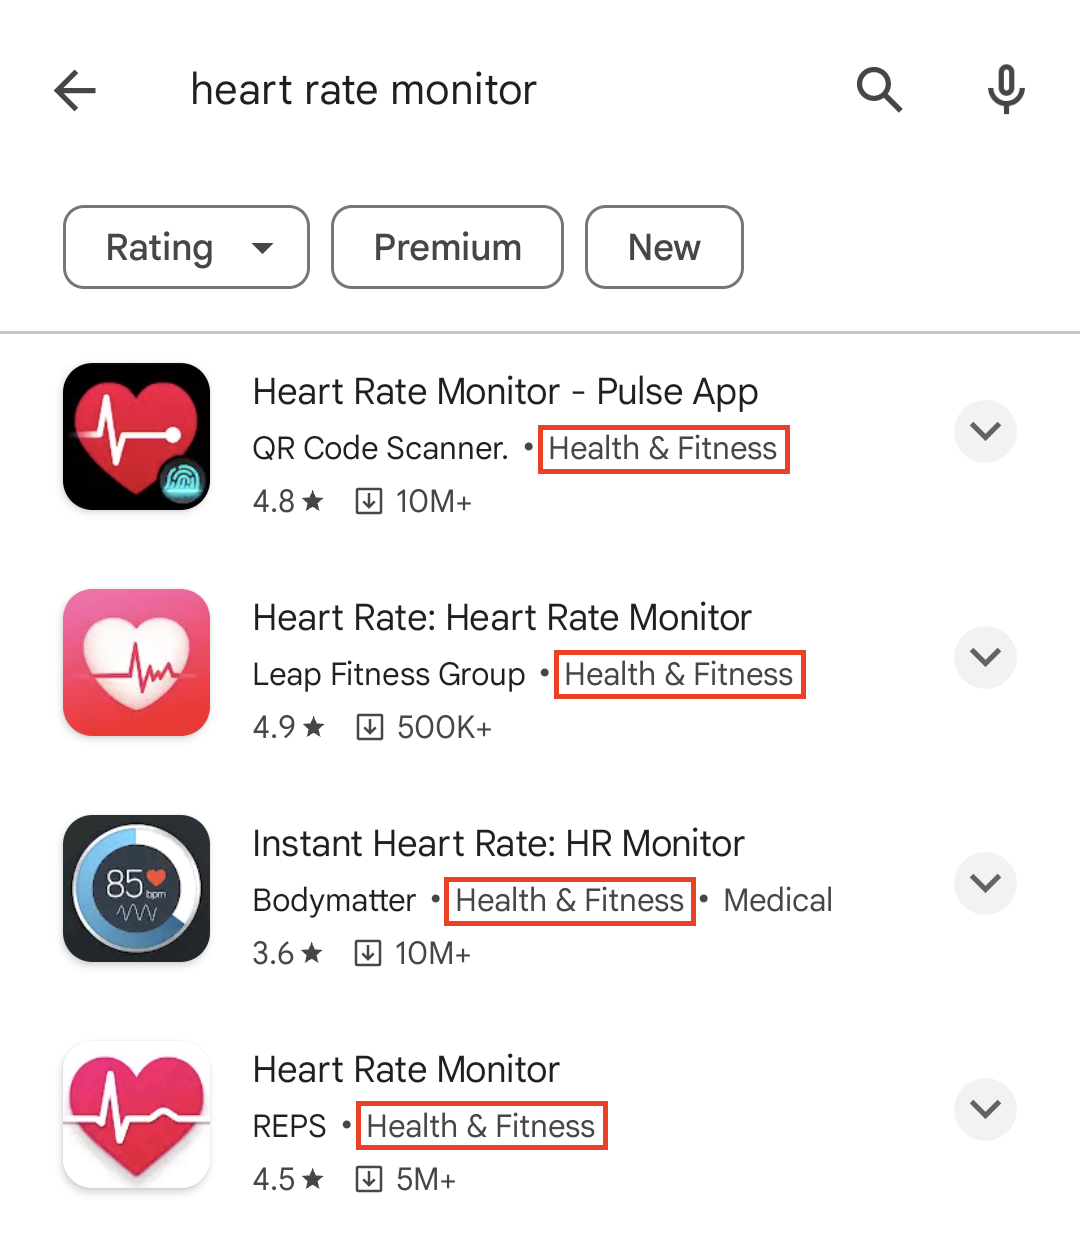 vl google play heart rate monitoring 65c10a30c8dce sej - A Complete Guide To App Store Optimization (ASO)